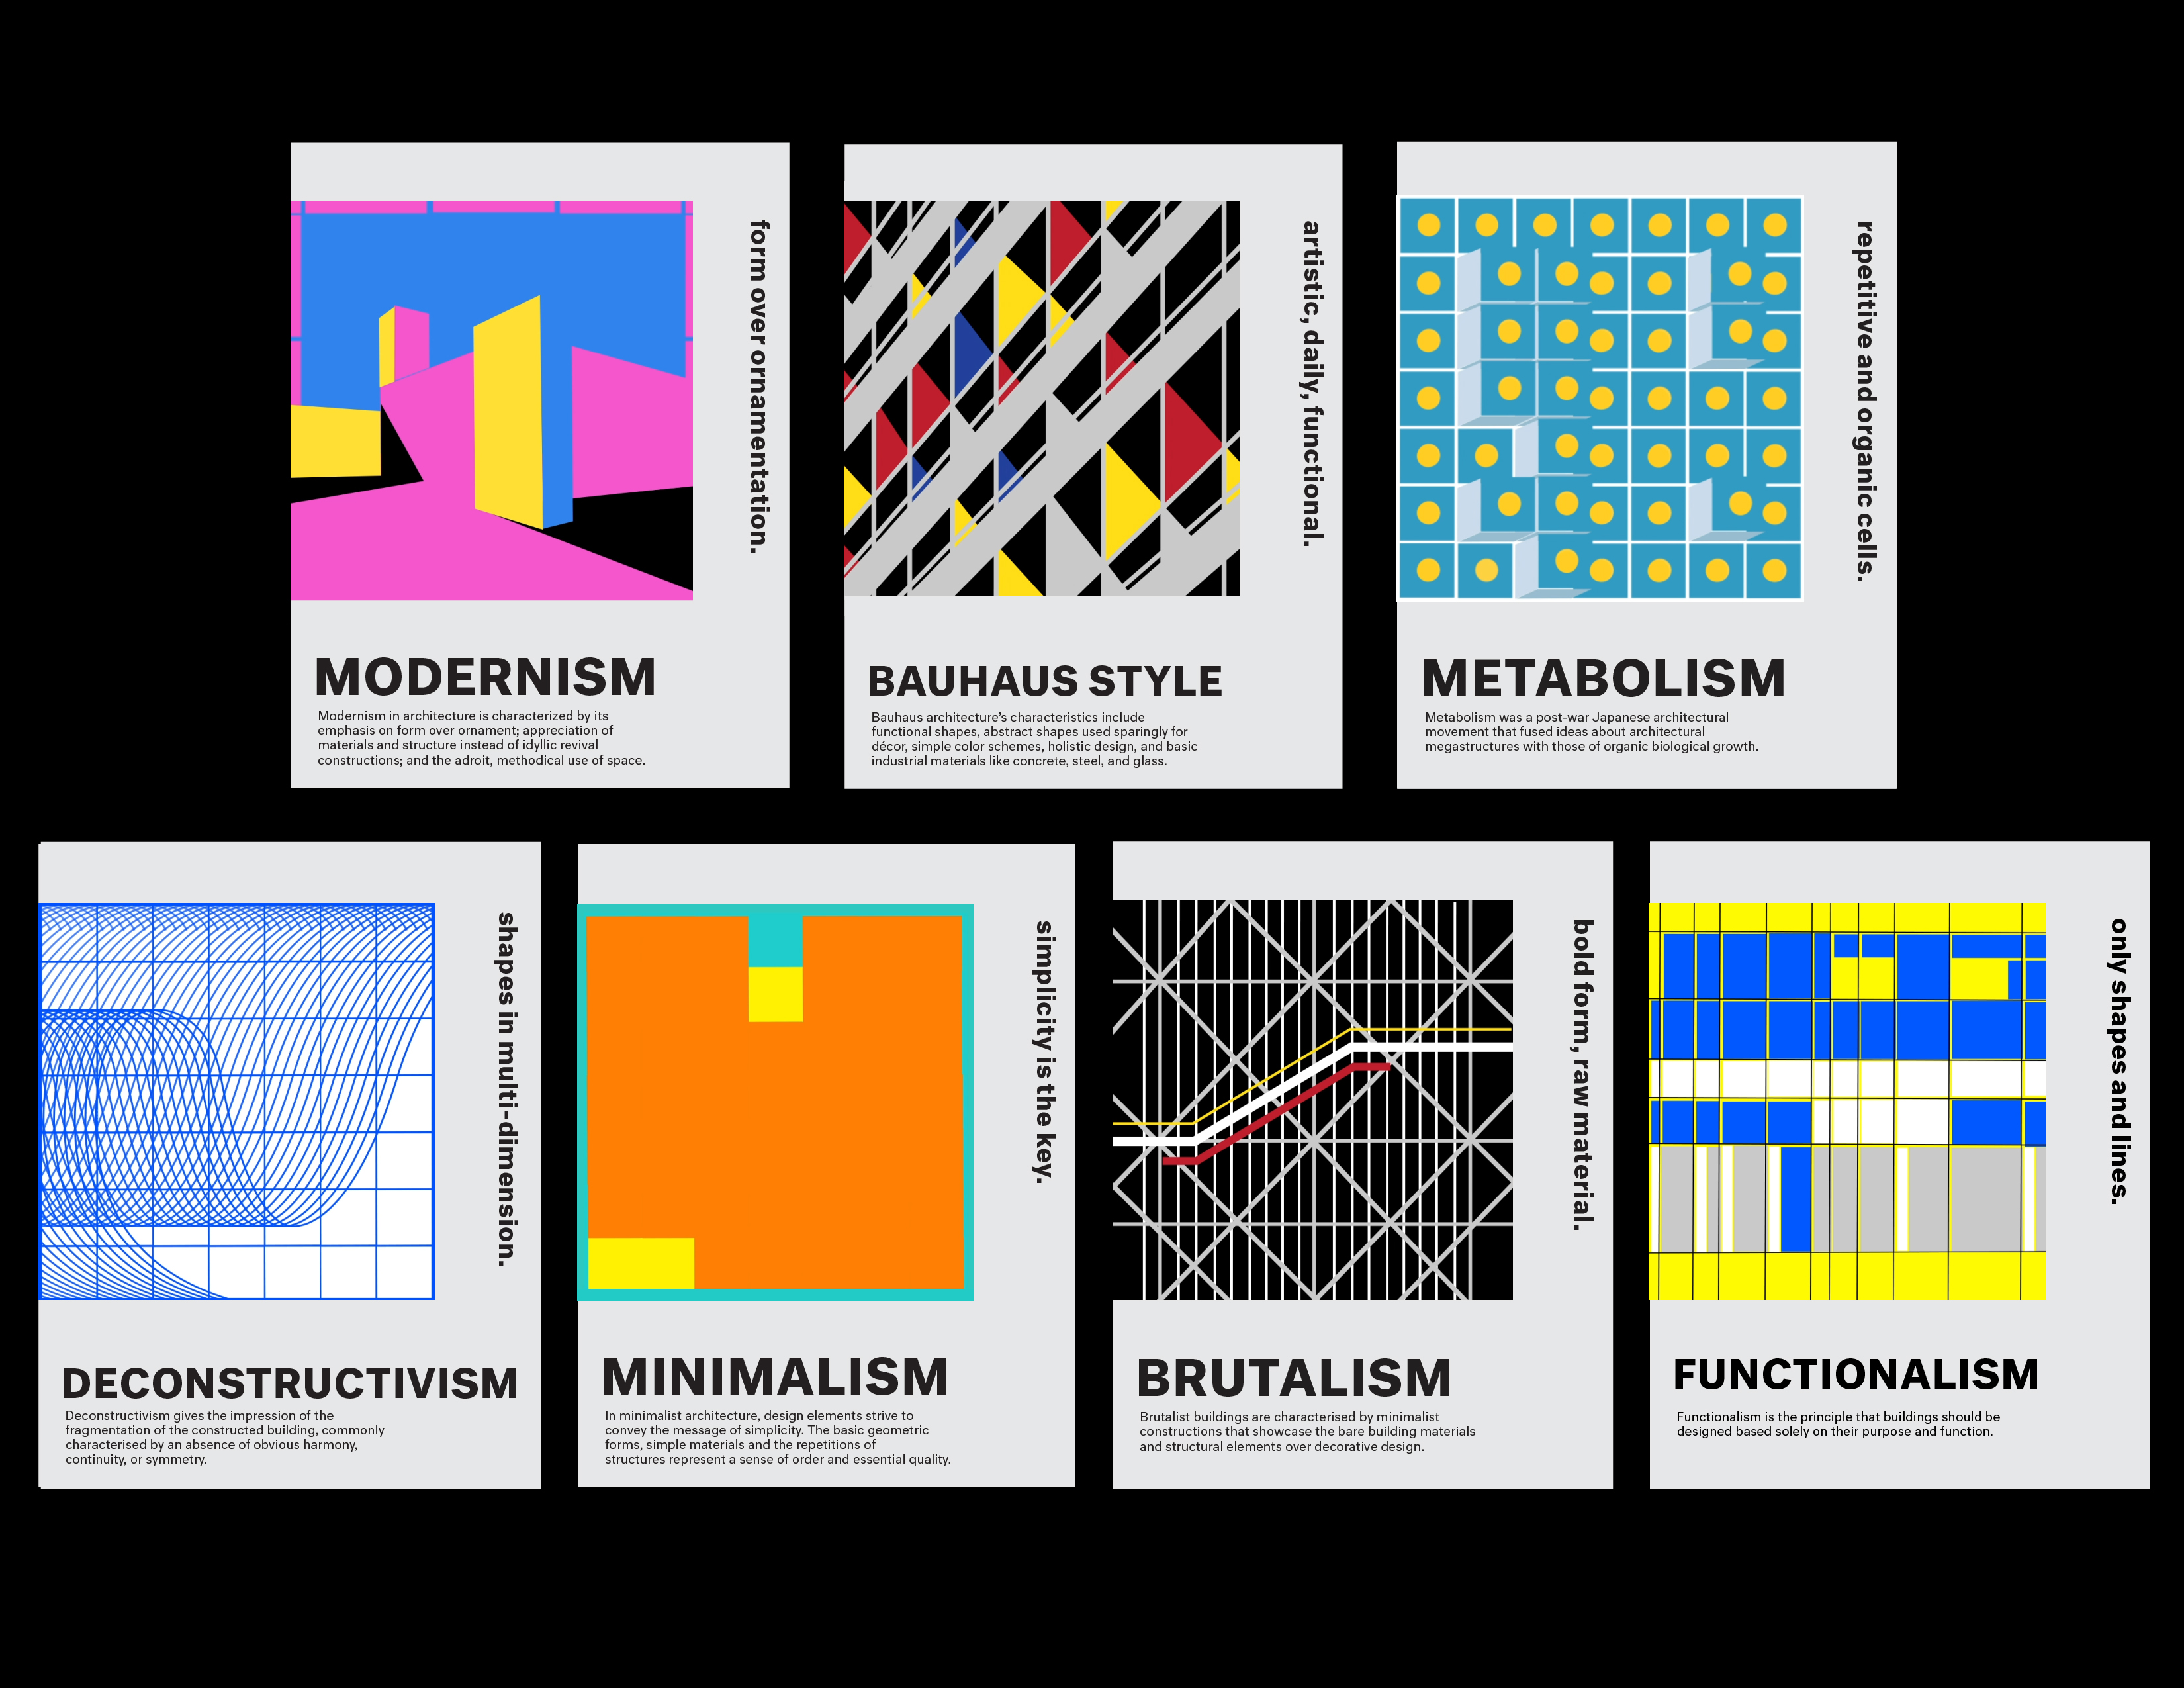 Modernism in Architecture  Definition, Movement, Examples